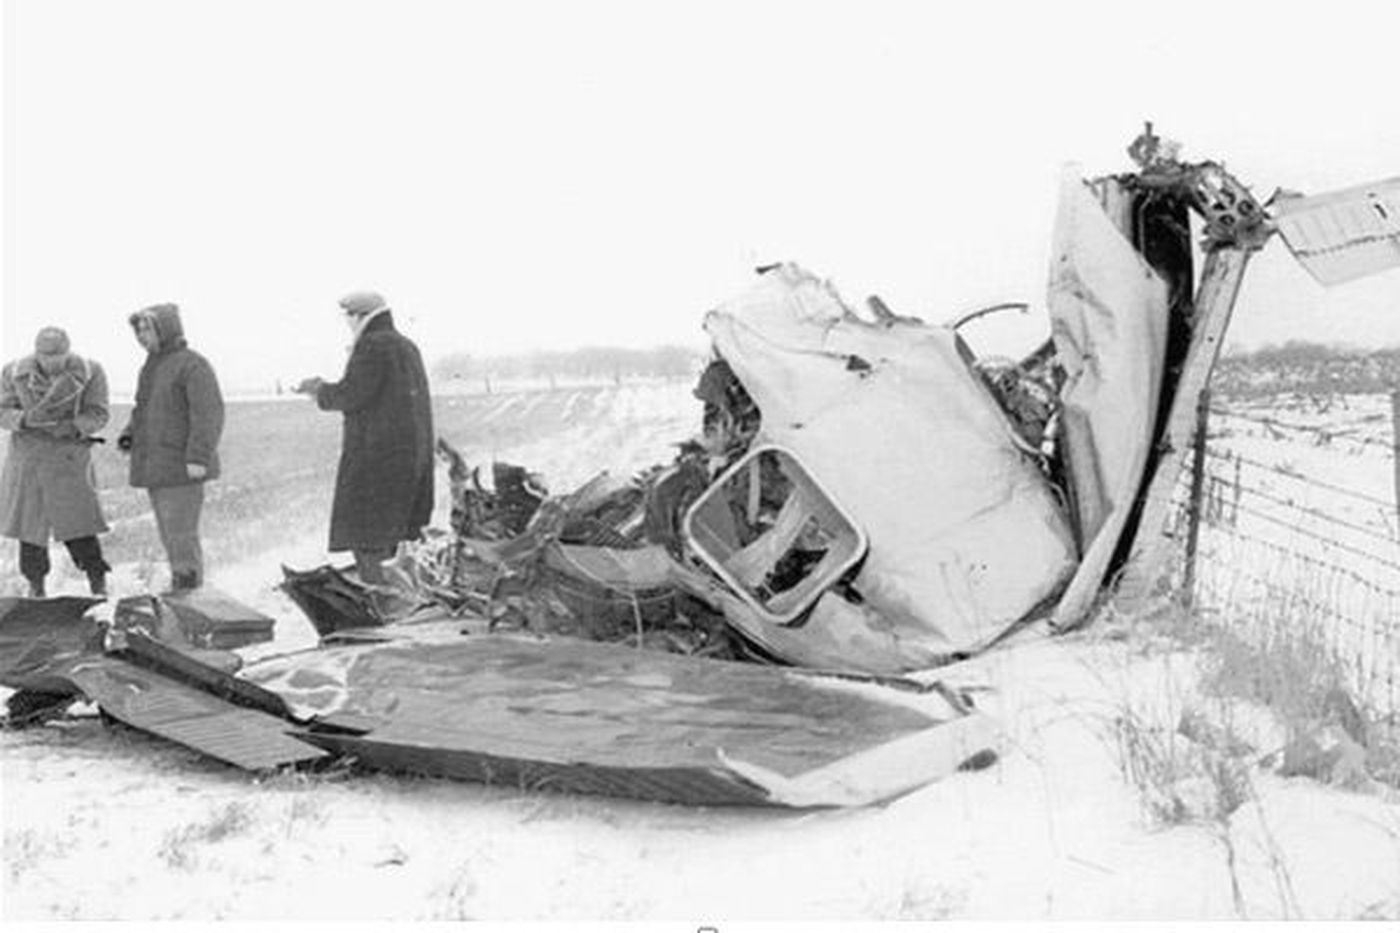 The Buddy Holly plane crash site. 5 miles north of Clear Lake, Iowa, February 3, 1959. (Elwin Musser/LEE NEWS SERVICE, The Globe Gazette)